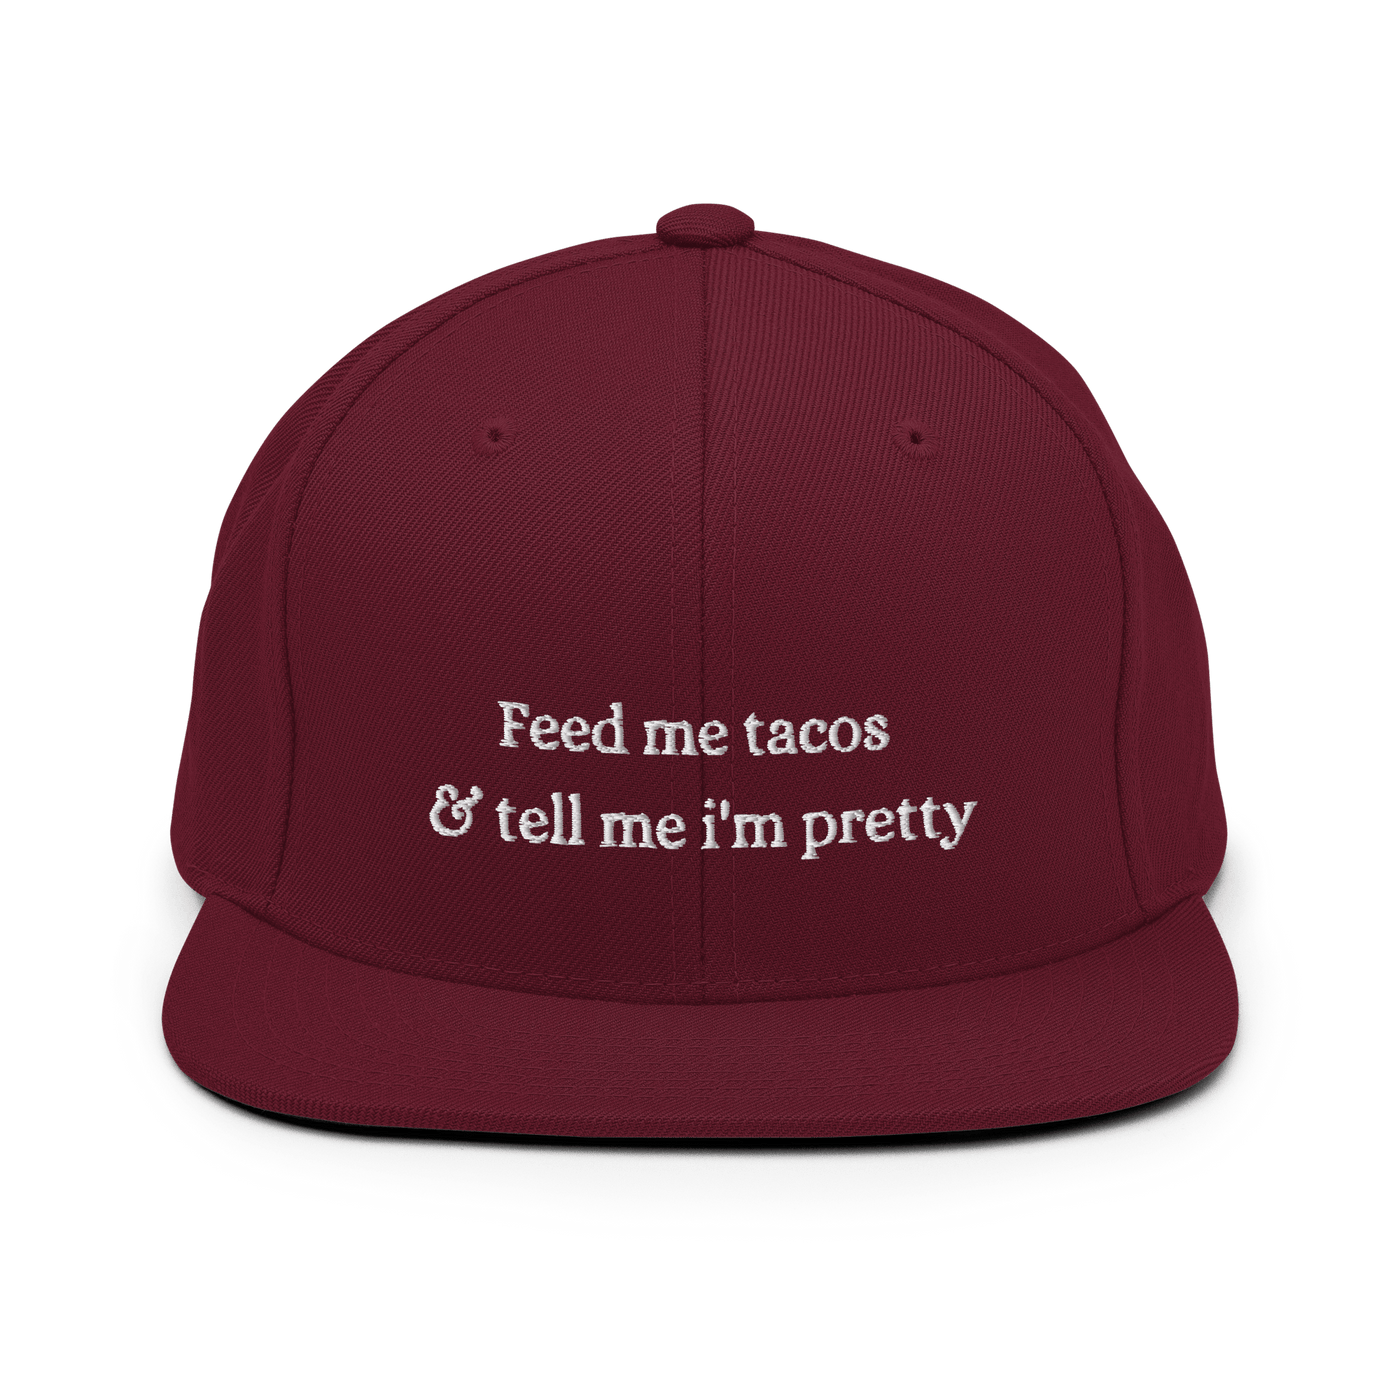 Feed me Tacos Snapback Hat - Maroon - - Just Another Cap Store